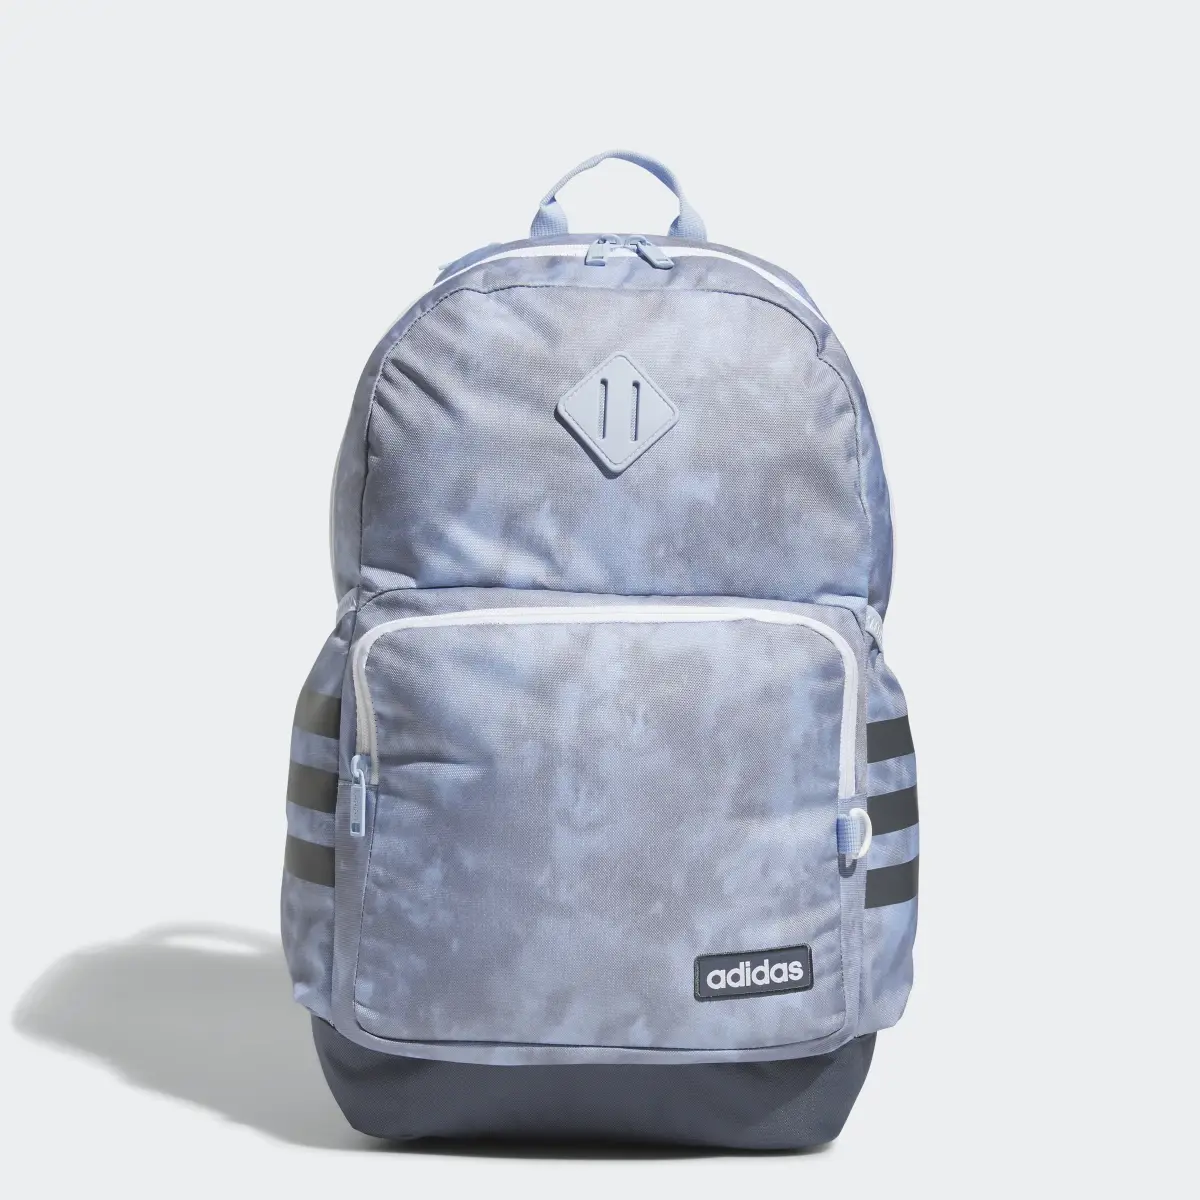 Adidas Classic 3-Stripes Backpack. 1